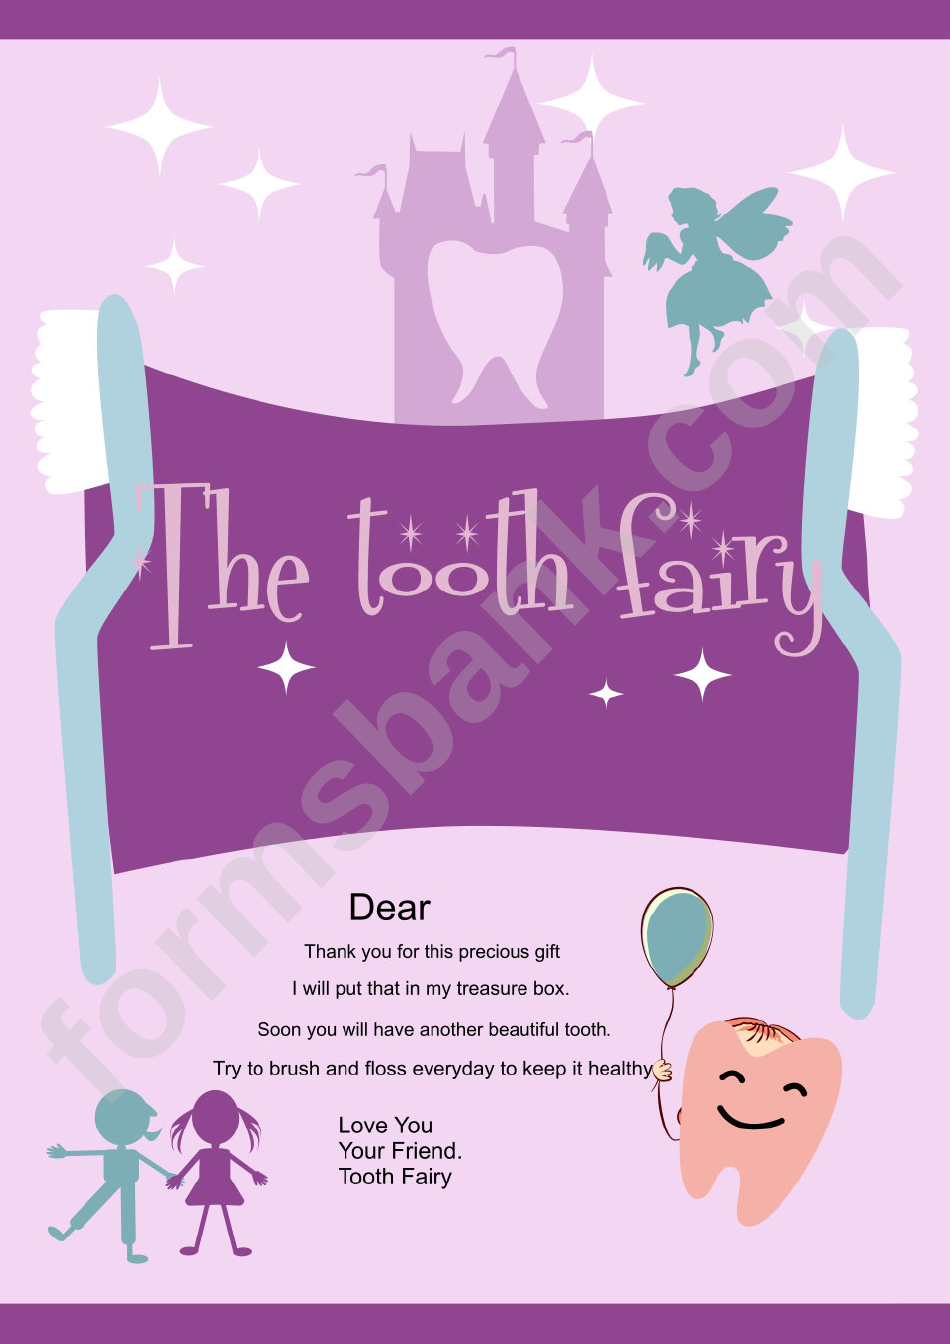 Tooth Fairy Letter Template